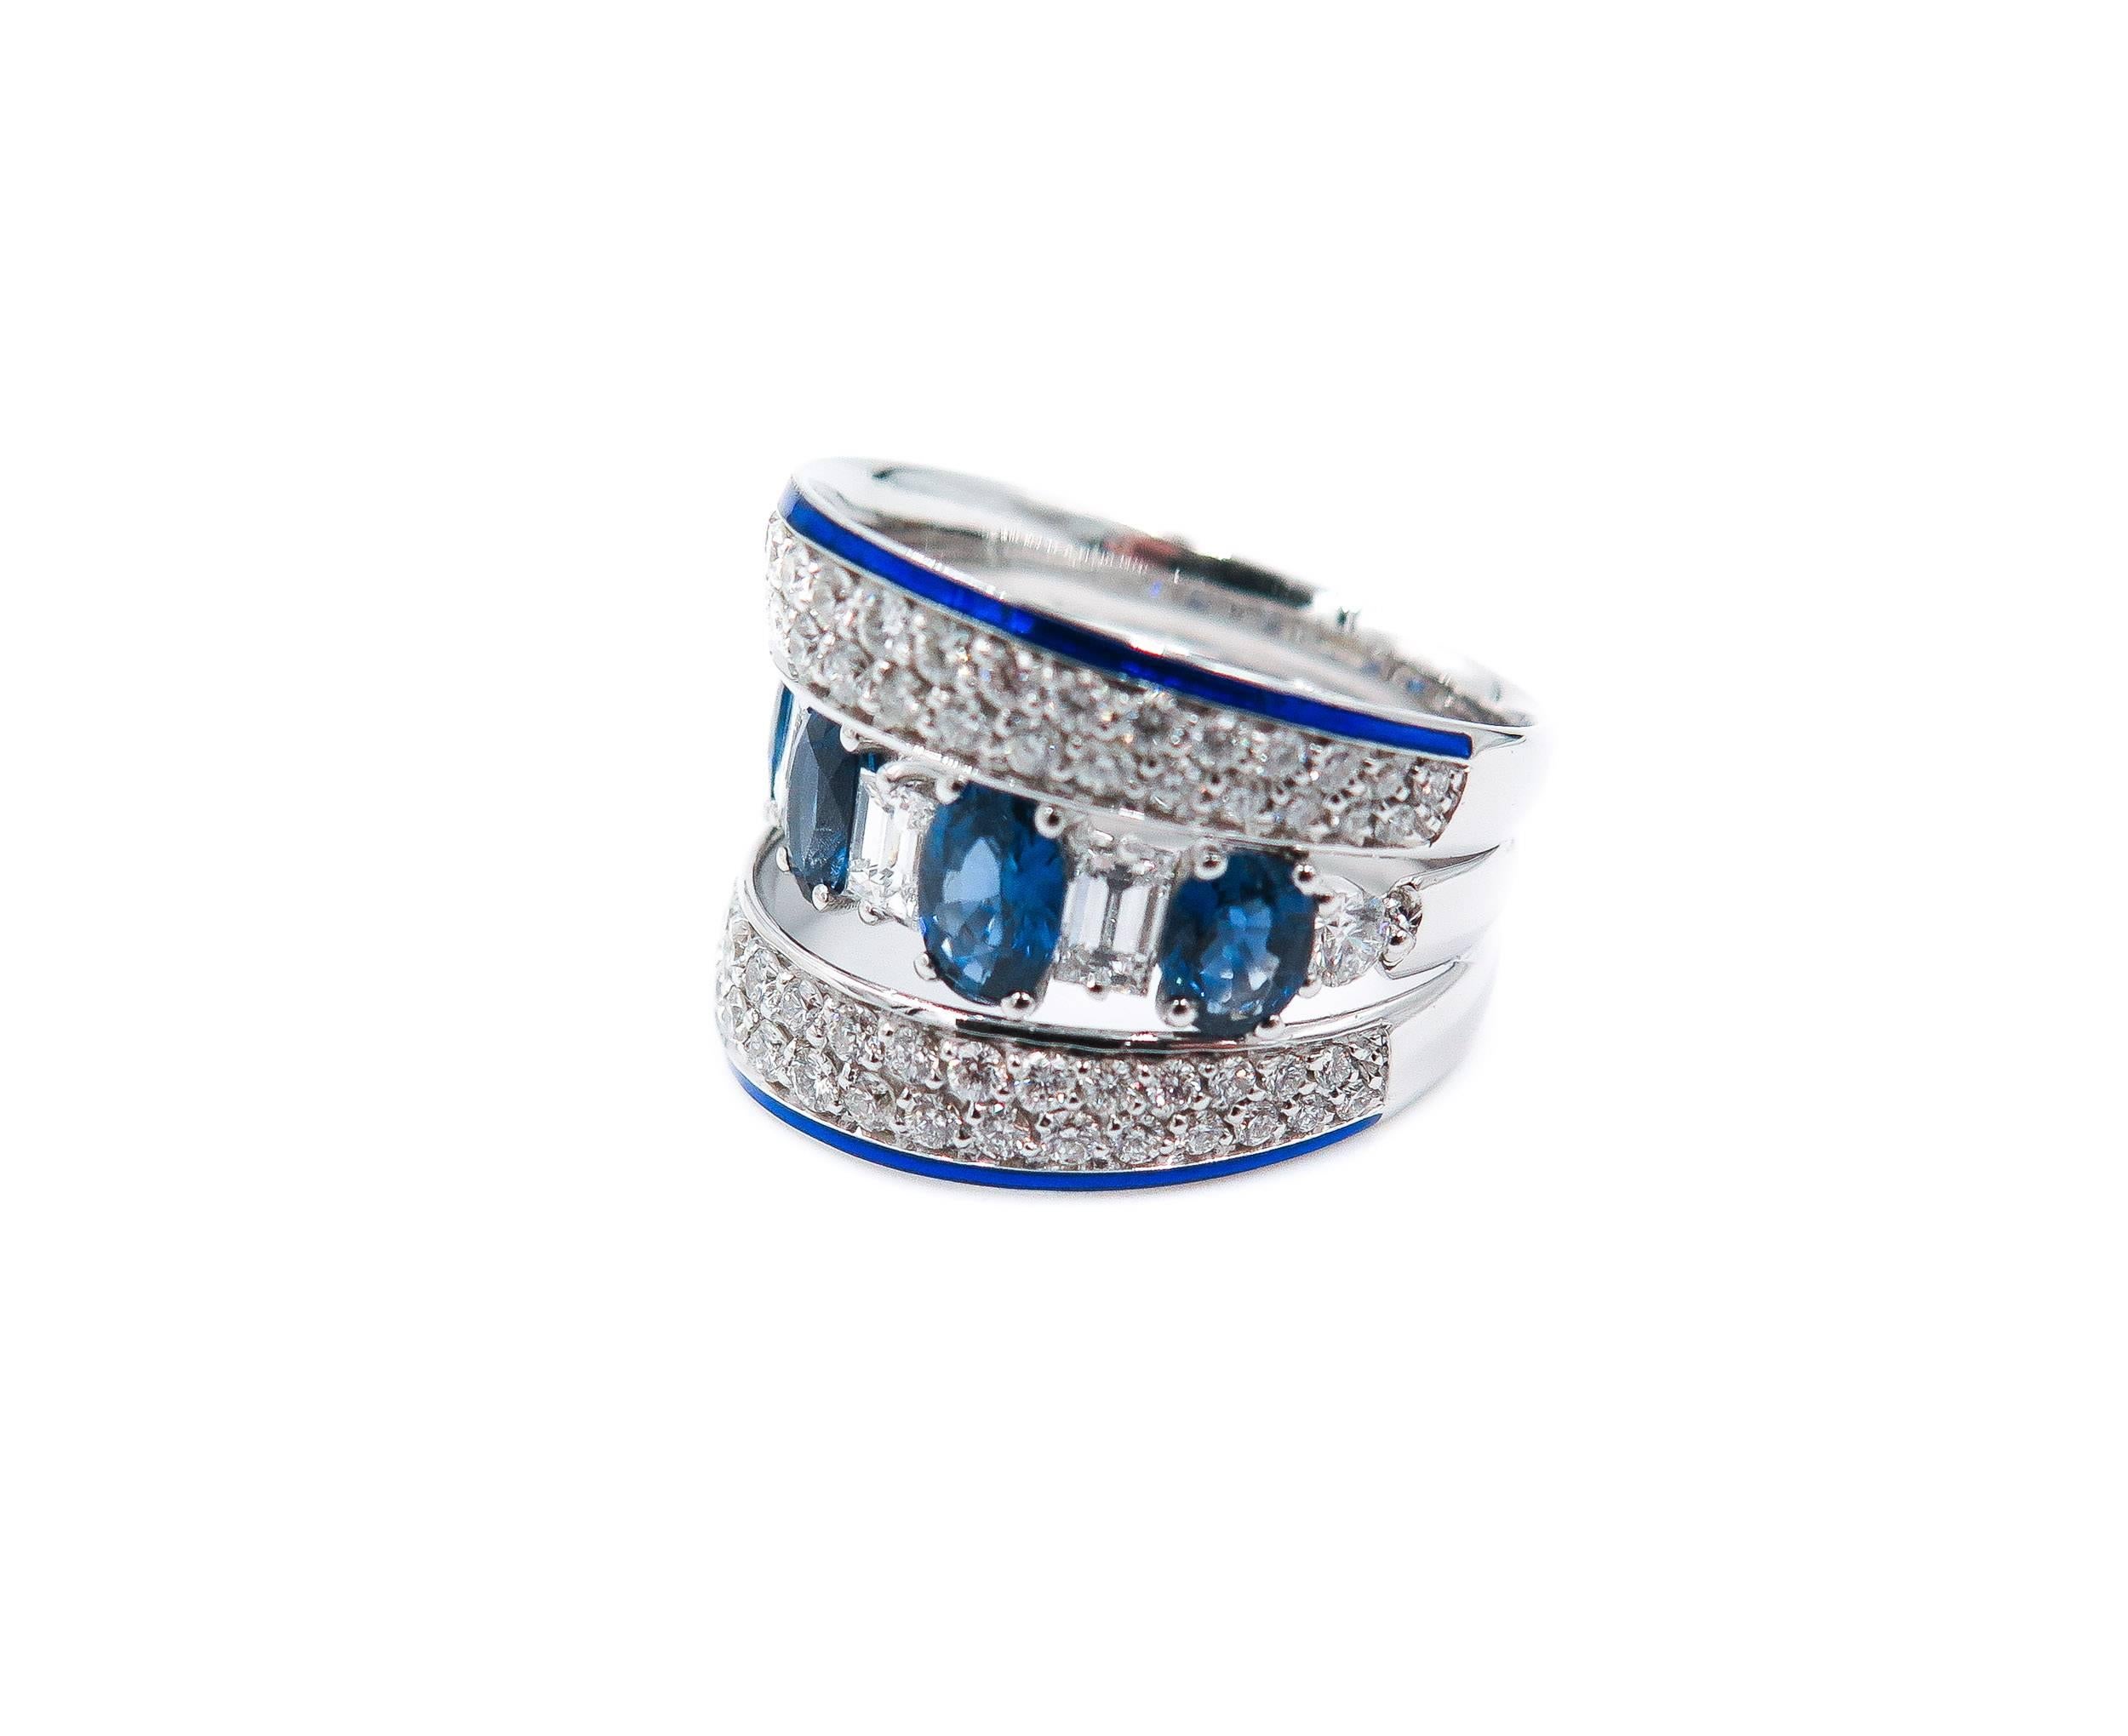 A beautiful 18k white gold diamond and sapphire dress band. 
The ring is comprised of 5 oval cut sapphires in a prong setting with a weight of 2.53 carat with a dark blue hue throughout. 
Complimenting these sapphires are 4 emerald cut diamonds in